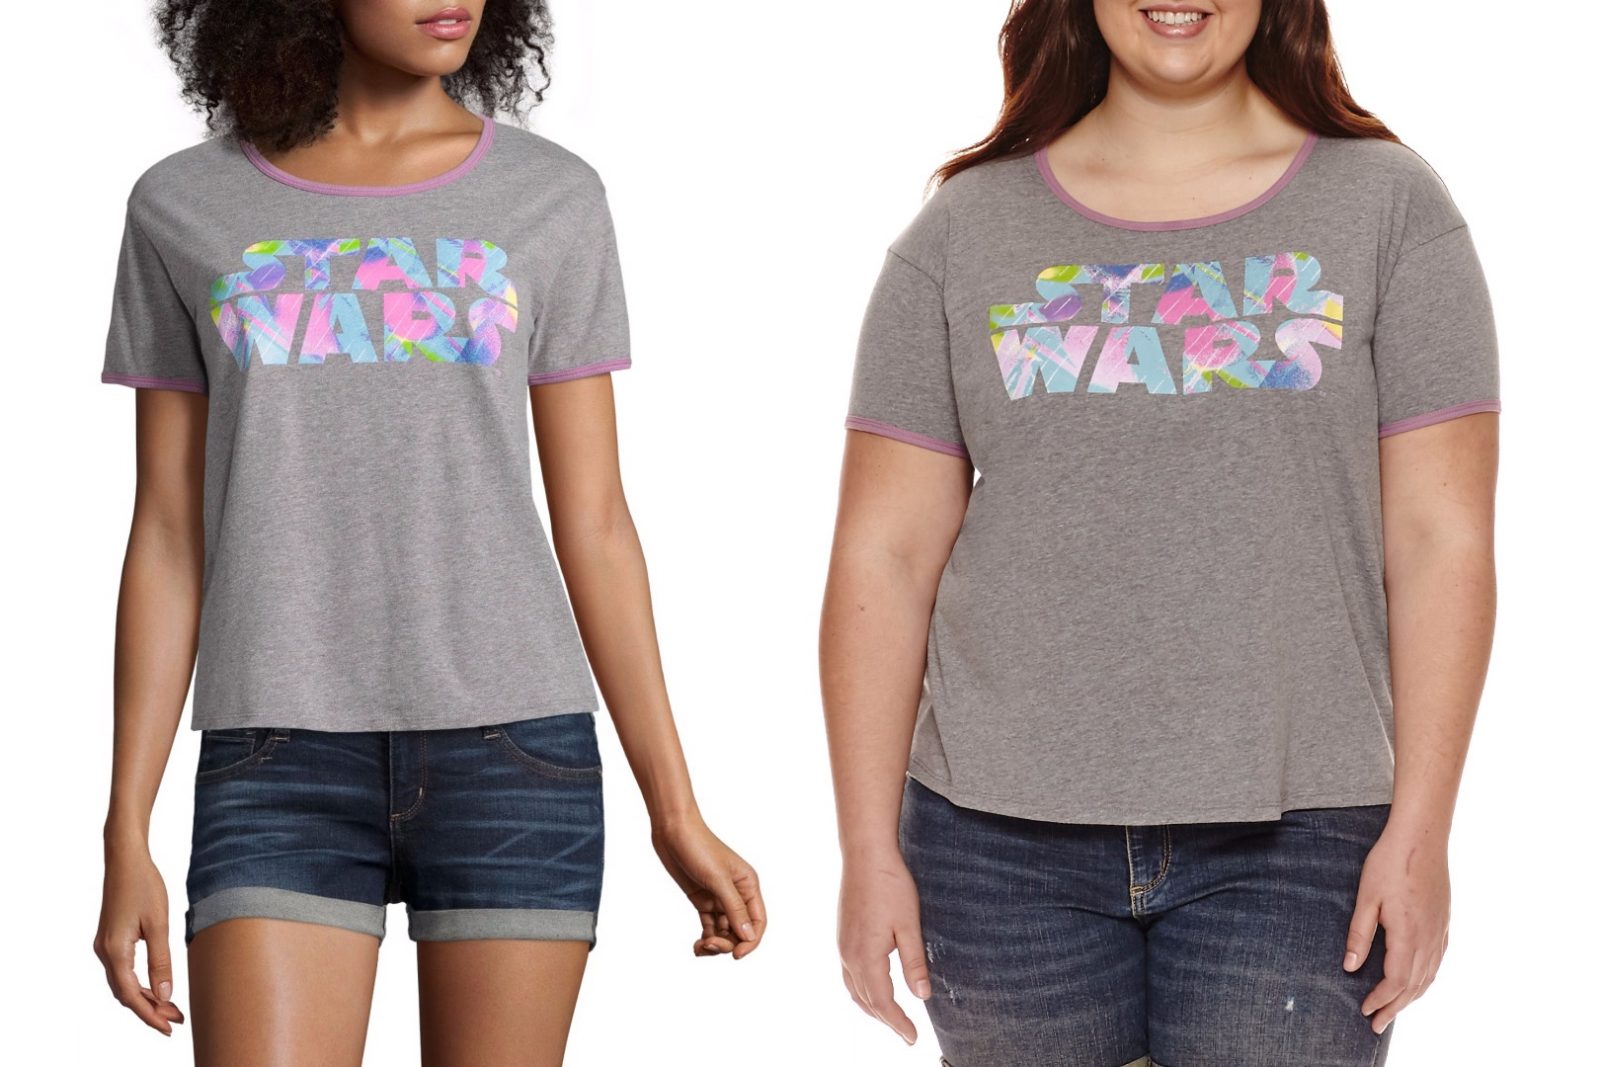 Women's Star Wars floral logo t-shirt at JCPenney